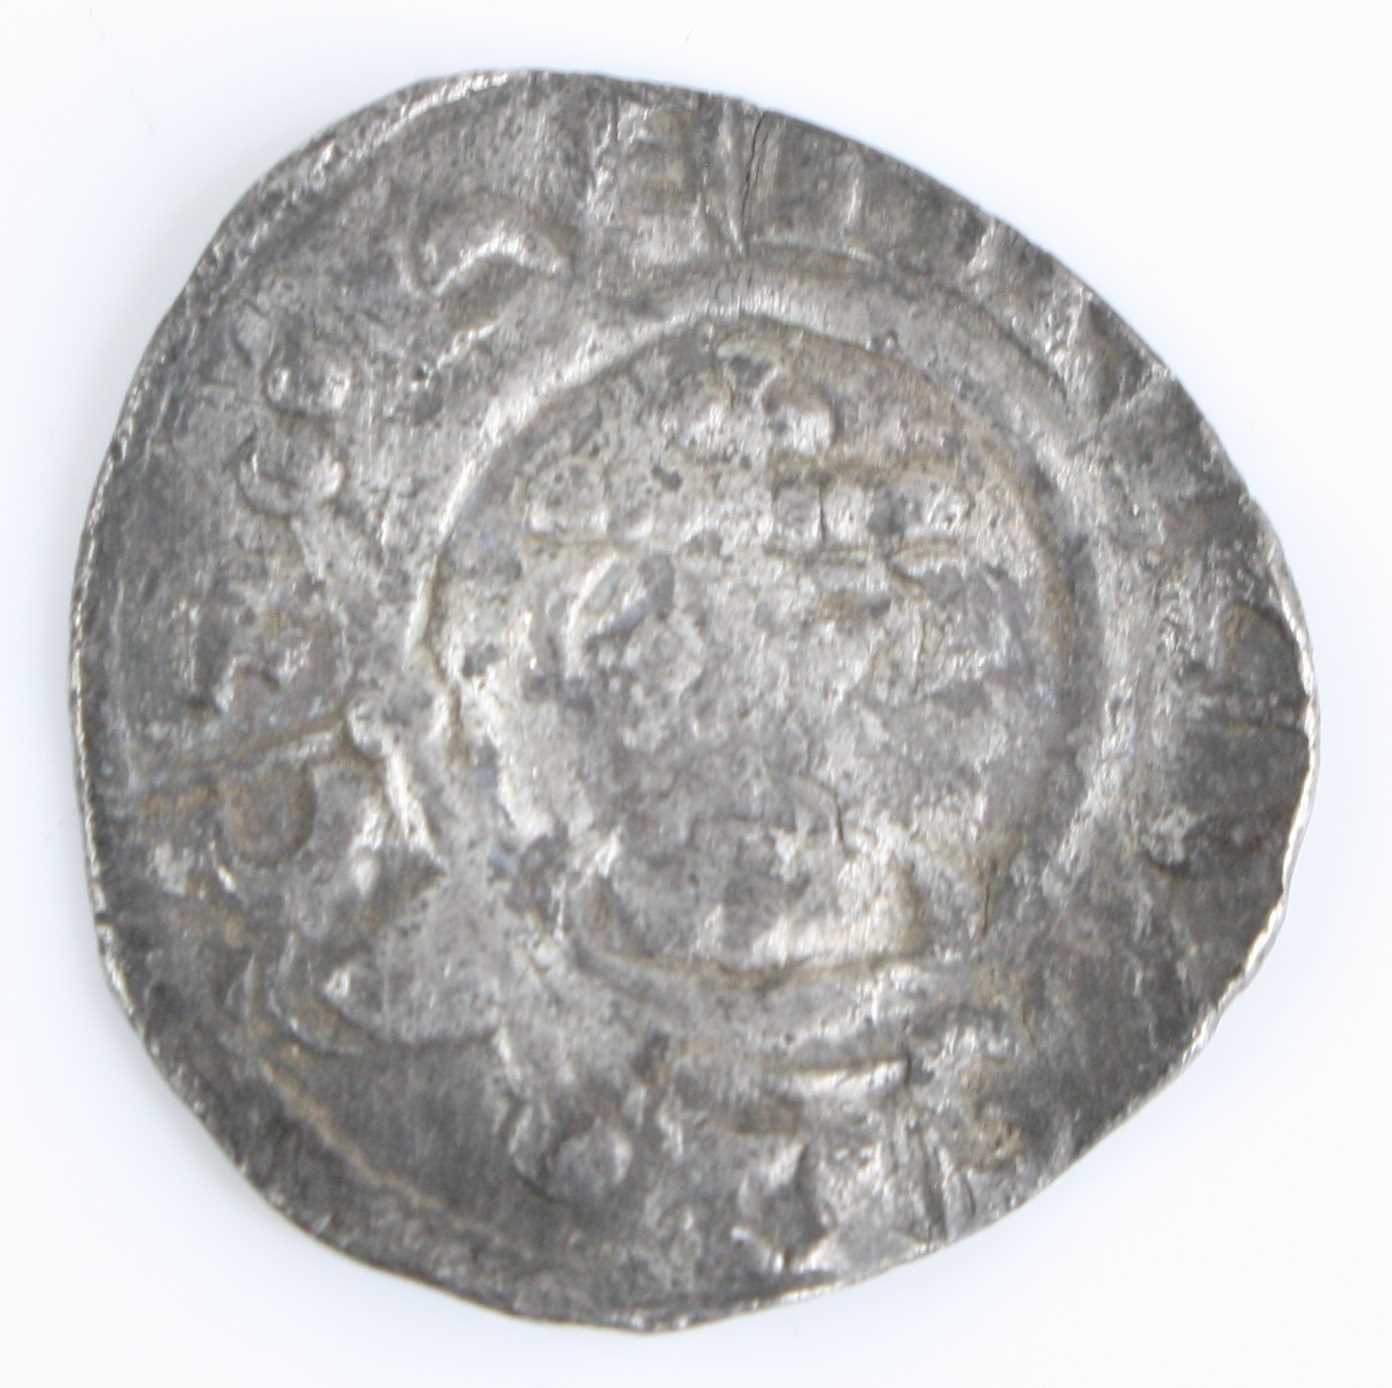 England, Henry II (1154-1189) penny, obv: crowned facing bust, rev: voided short cross with